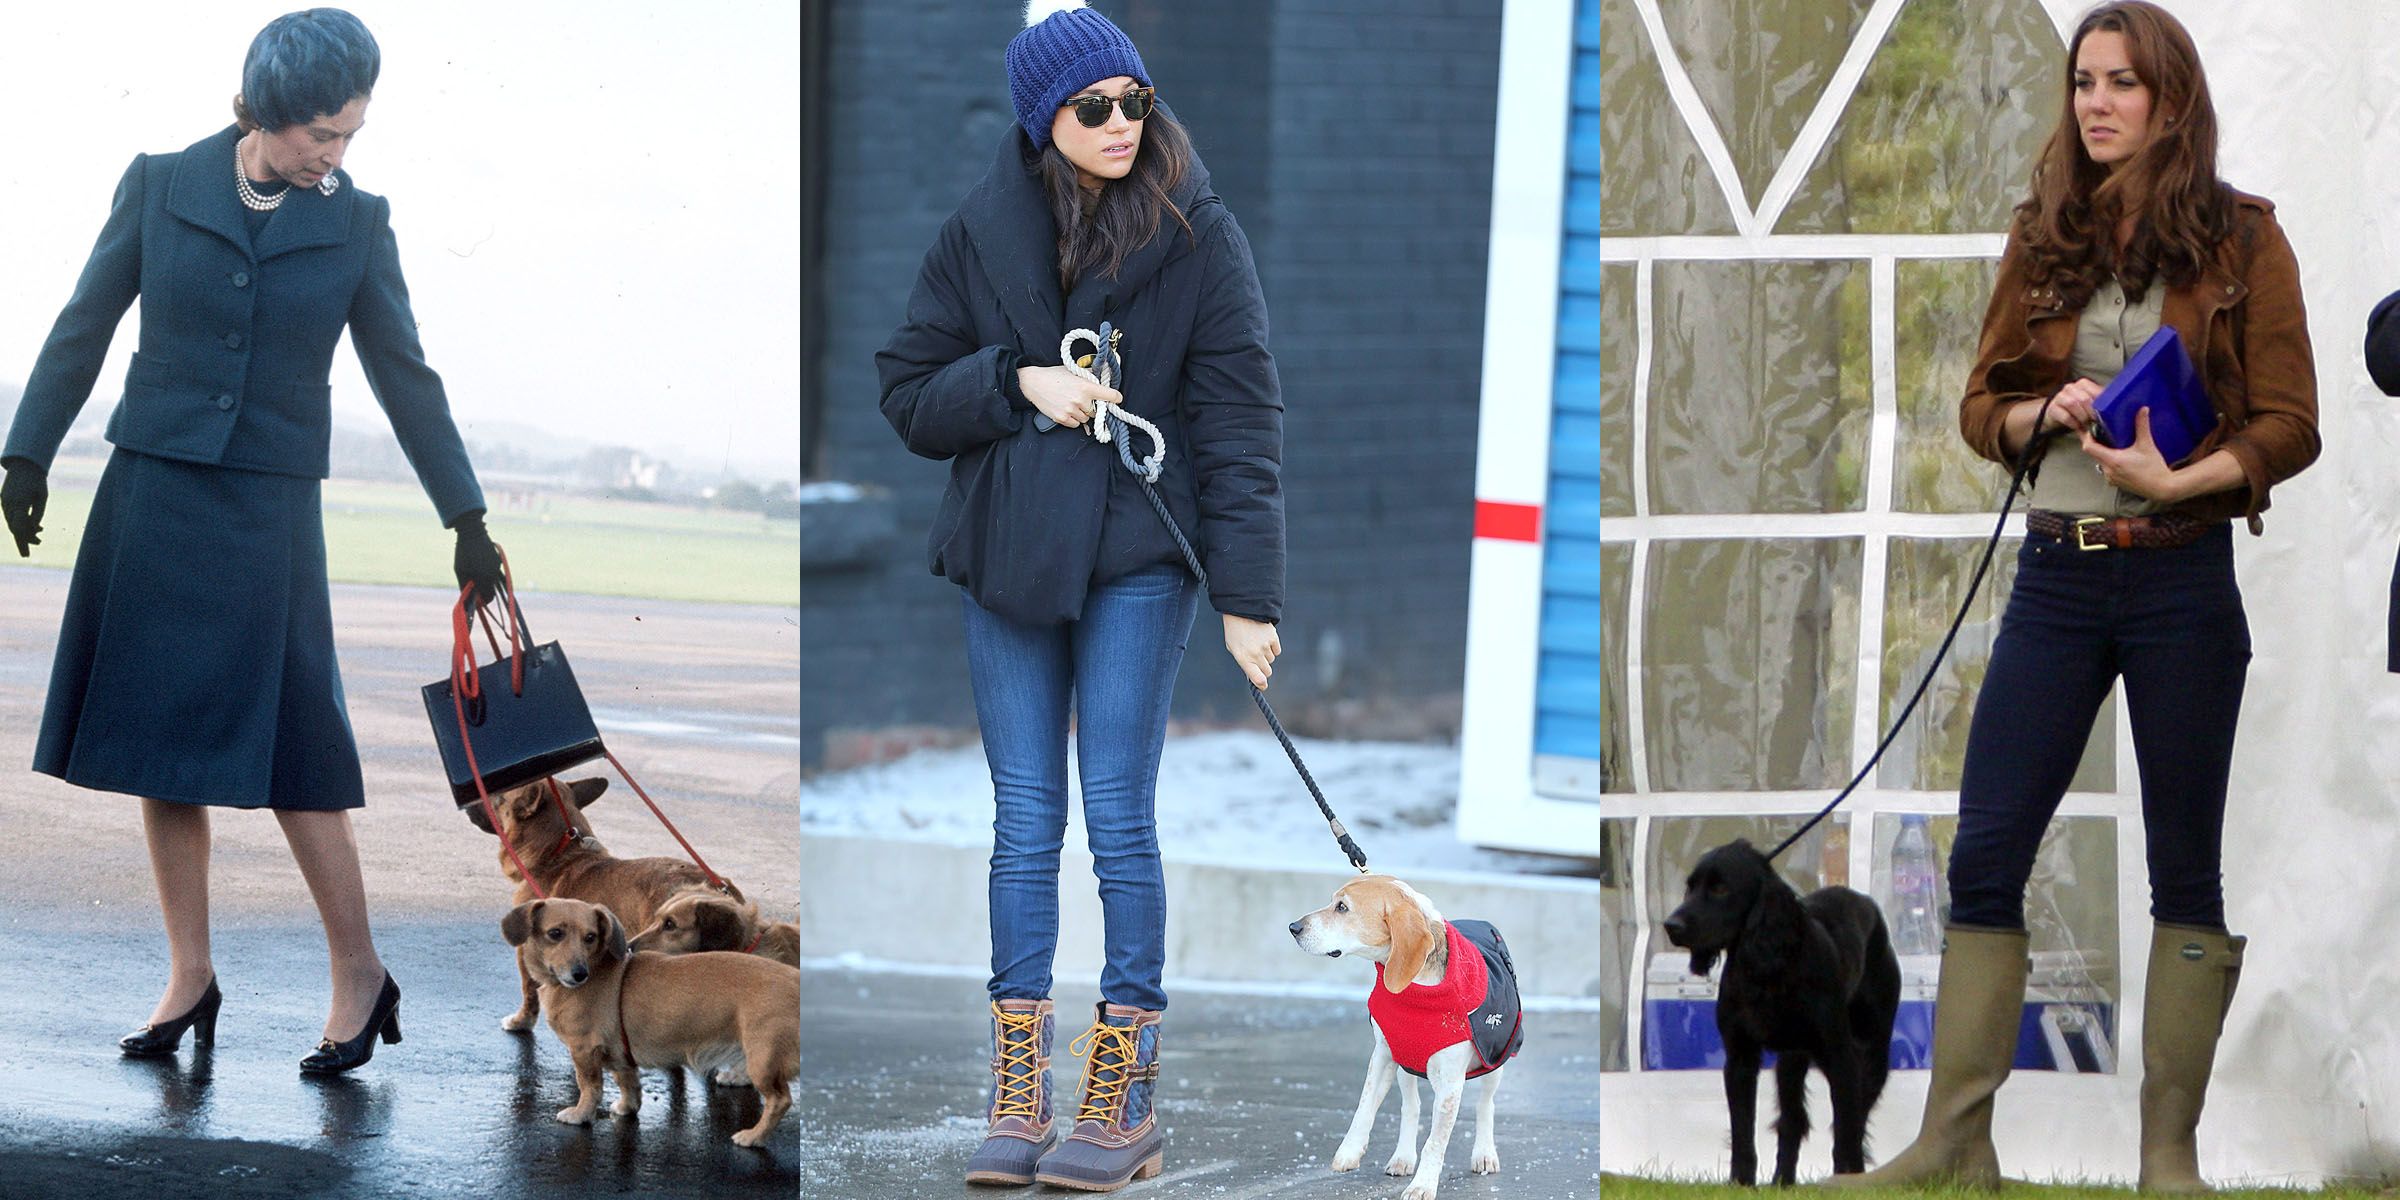 Does the Royal Family Walk Their Dogs? - Was Meghan Markle Walking Her Dog?